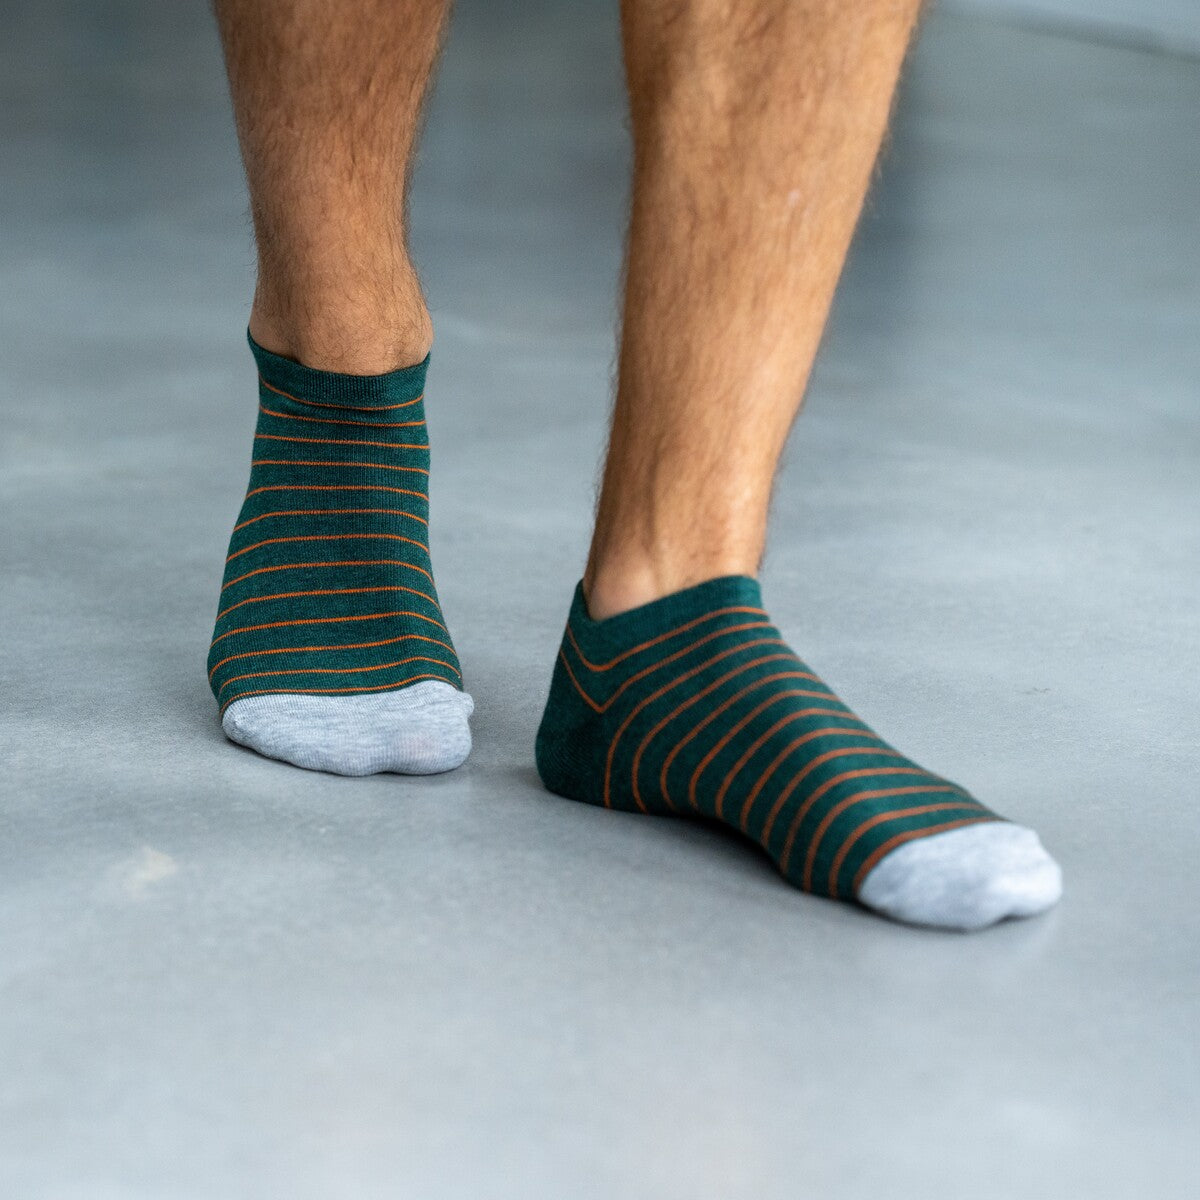 Ankle socks in combed cotton Striped - Orange and green